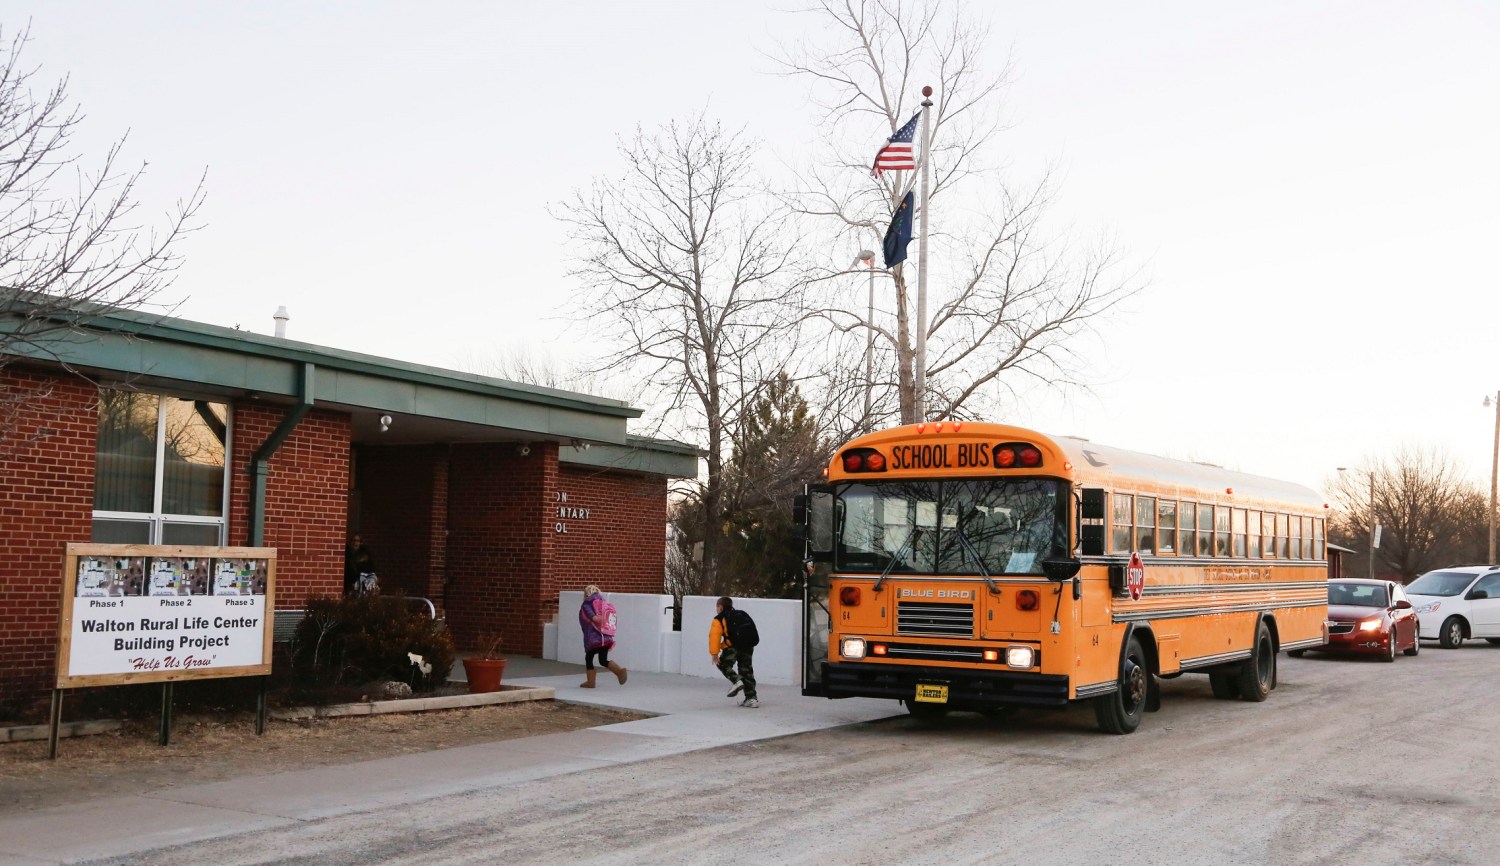 Students arrive at the Walton Rural Life Center Elementary School, in Walton, Kansas, January 18, 2013. Students at the school do farm chores at the beginning of each school day. The Walton Rural Life Center - a kindergarten through fourth grade charter school in rural Kansas - uses agriculture to teach students about math, science, economics. REUTERS/Jeff Tuttle (UNITED STATES - Tags: EDUCATION AGRICULTURE SOCIETY) - RTR3DVPU